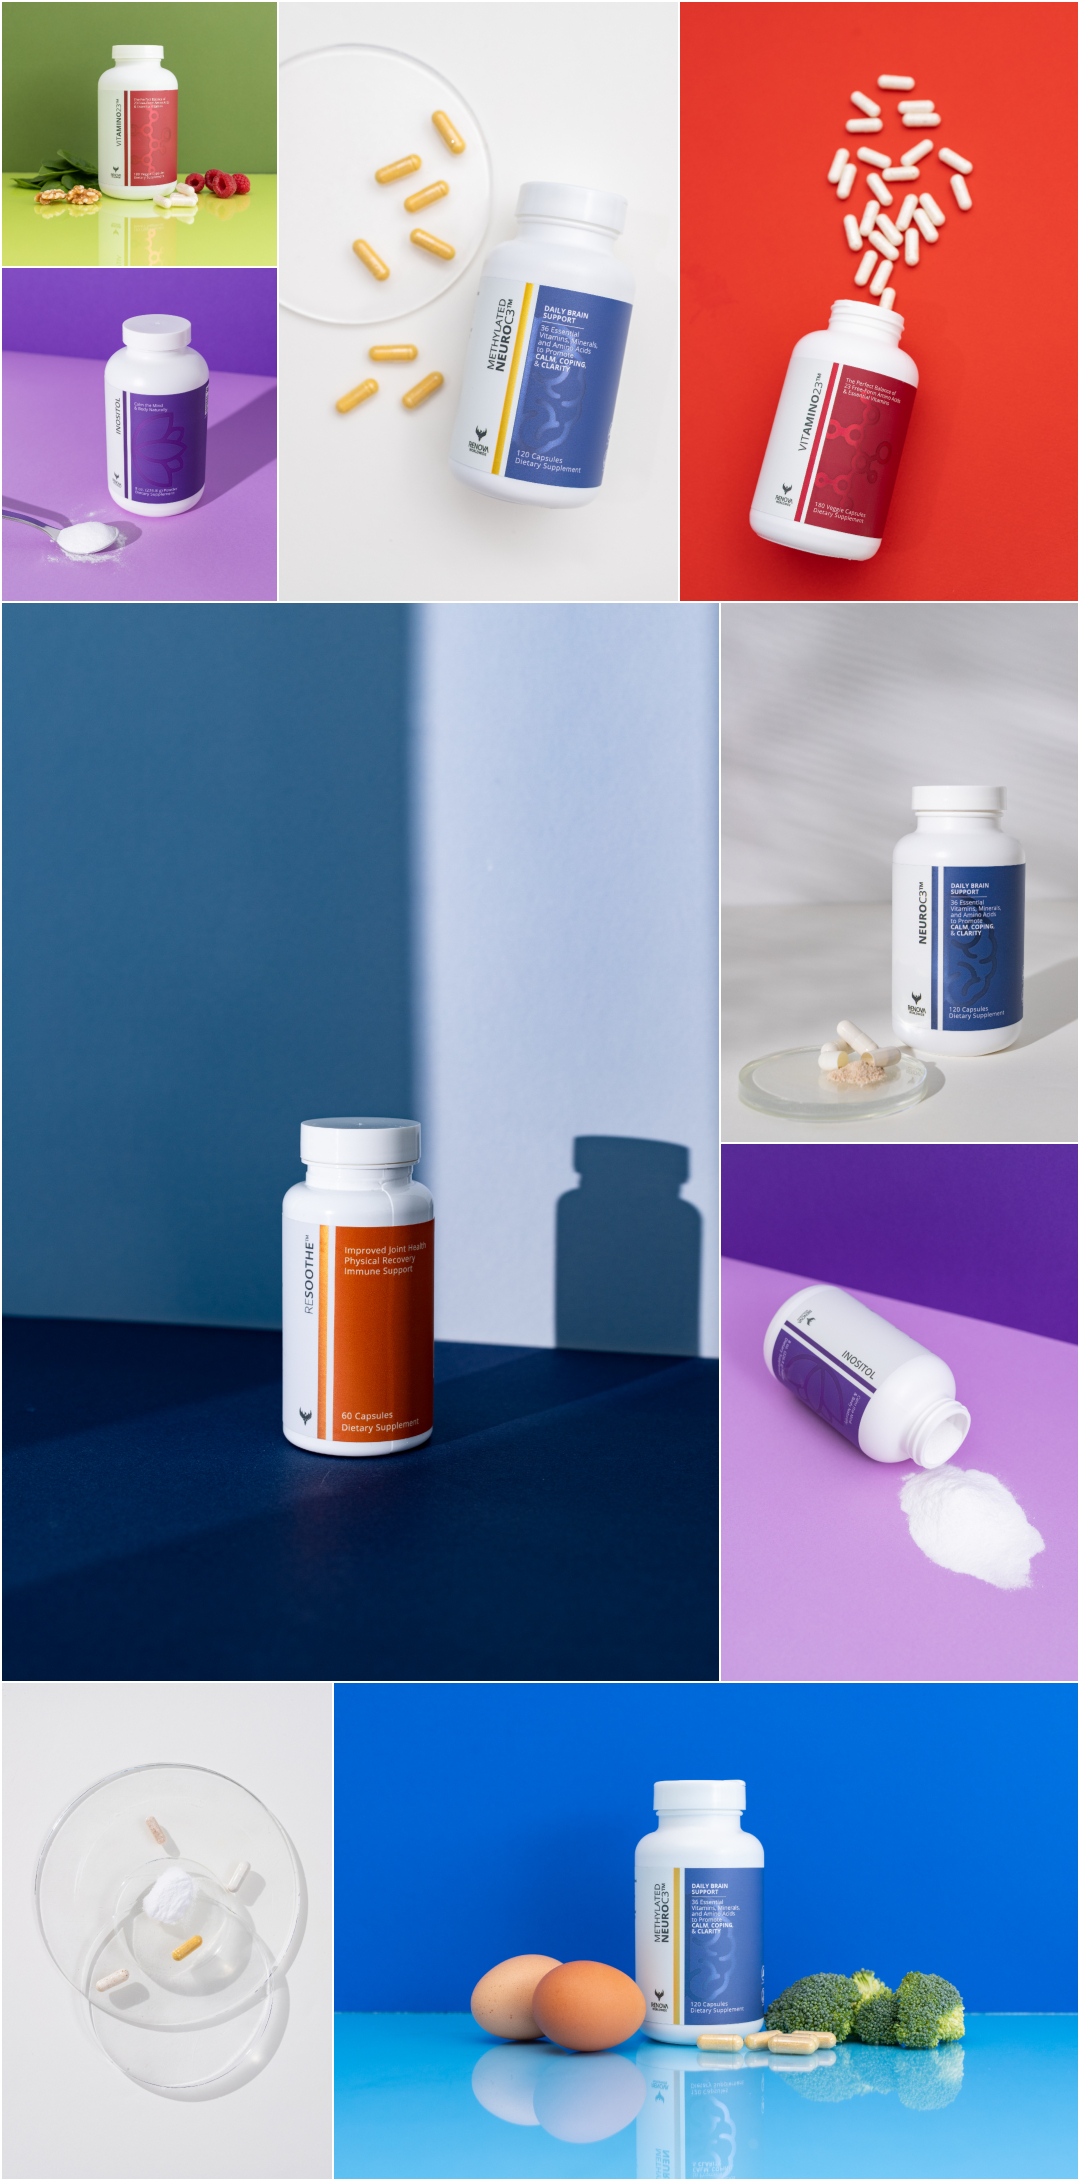 Multi Vitamin Product Photography - Creative Product Photography